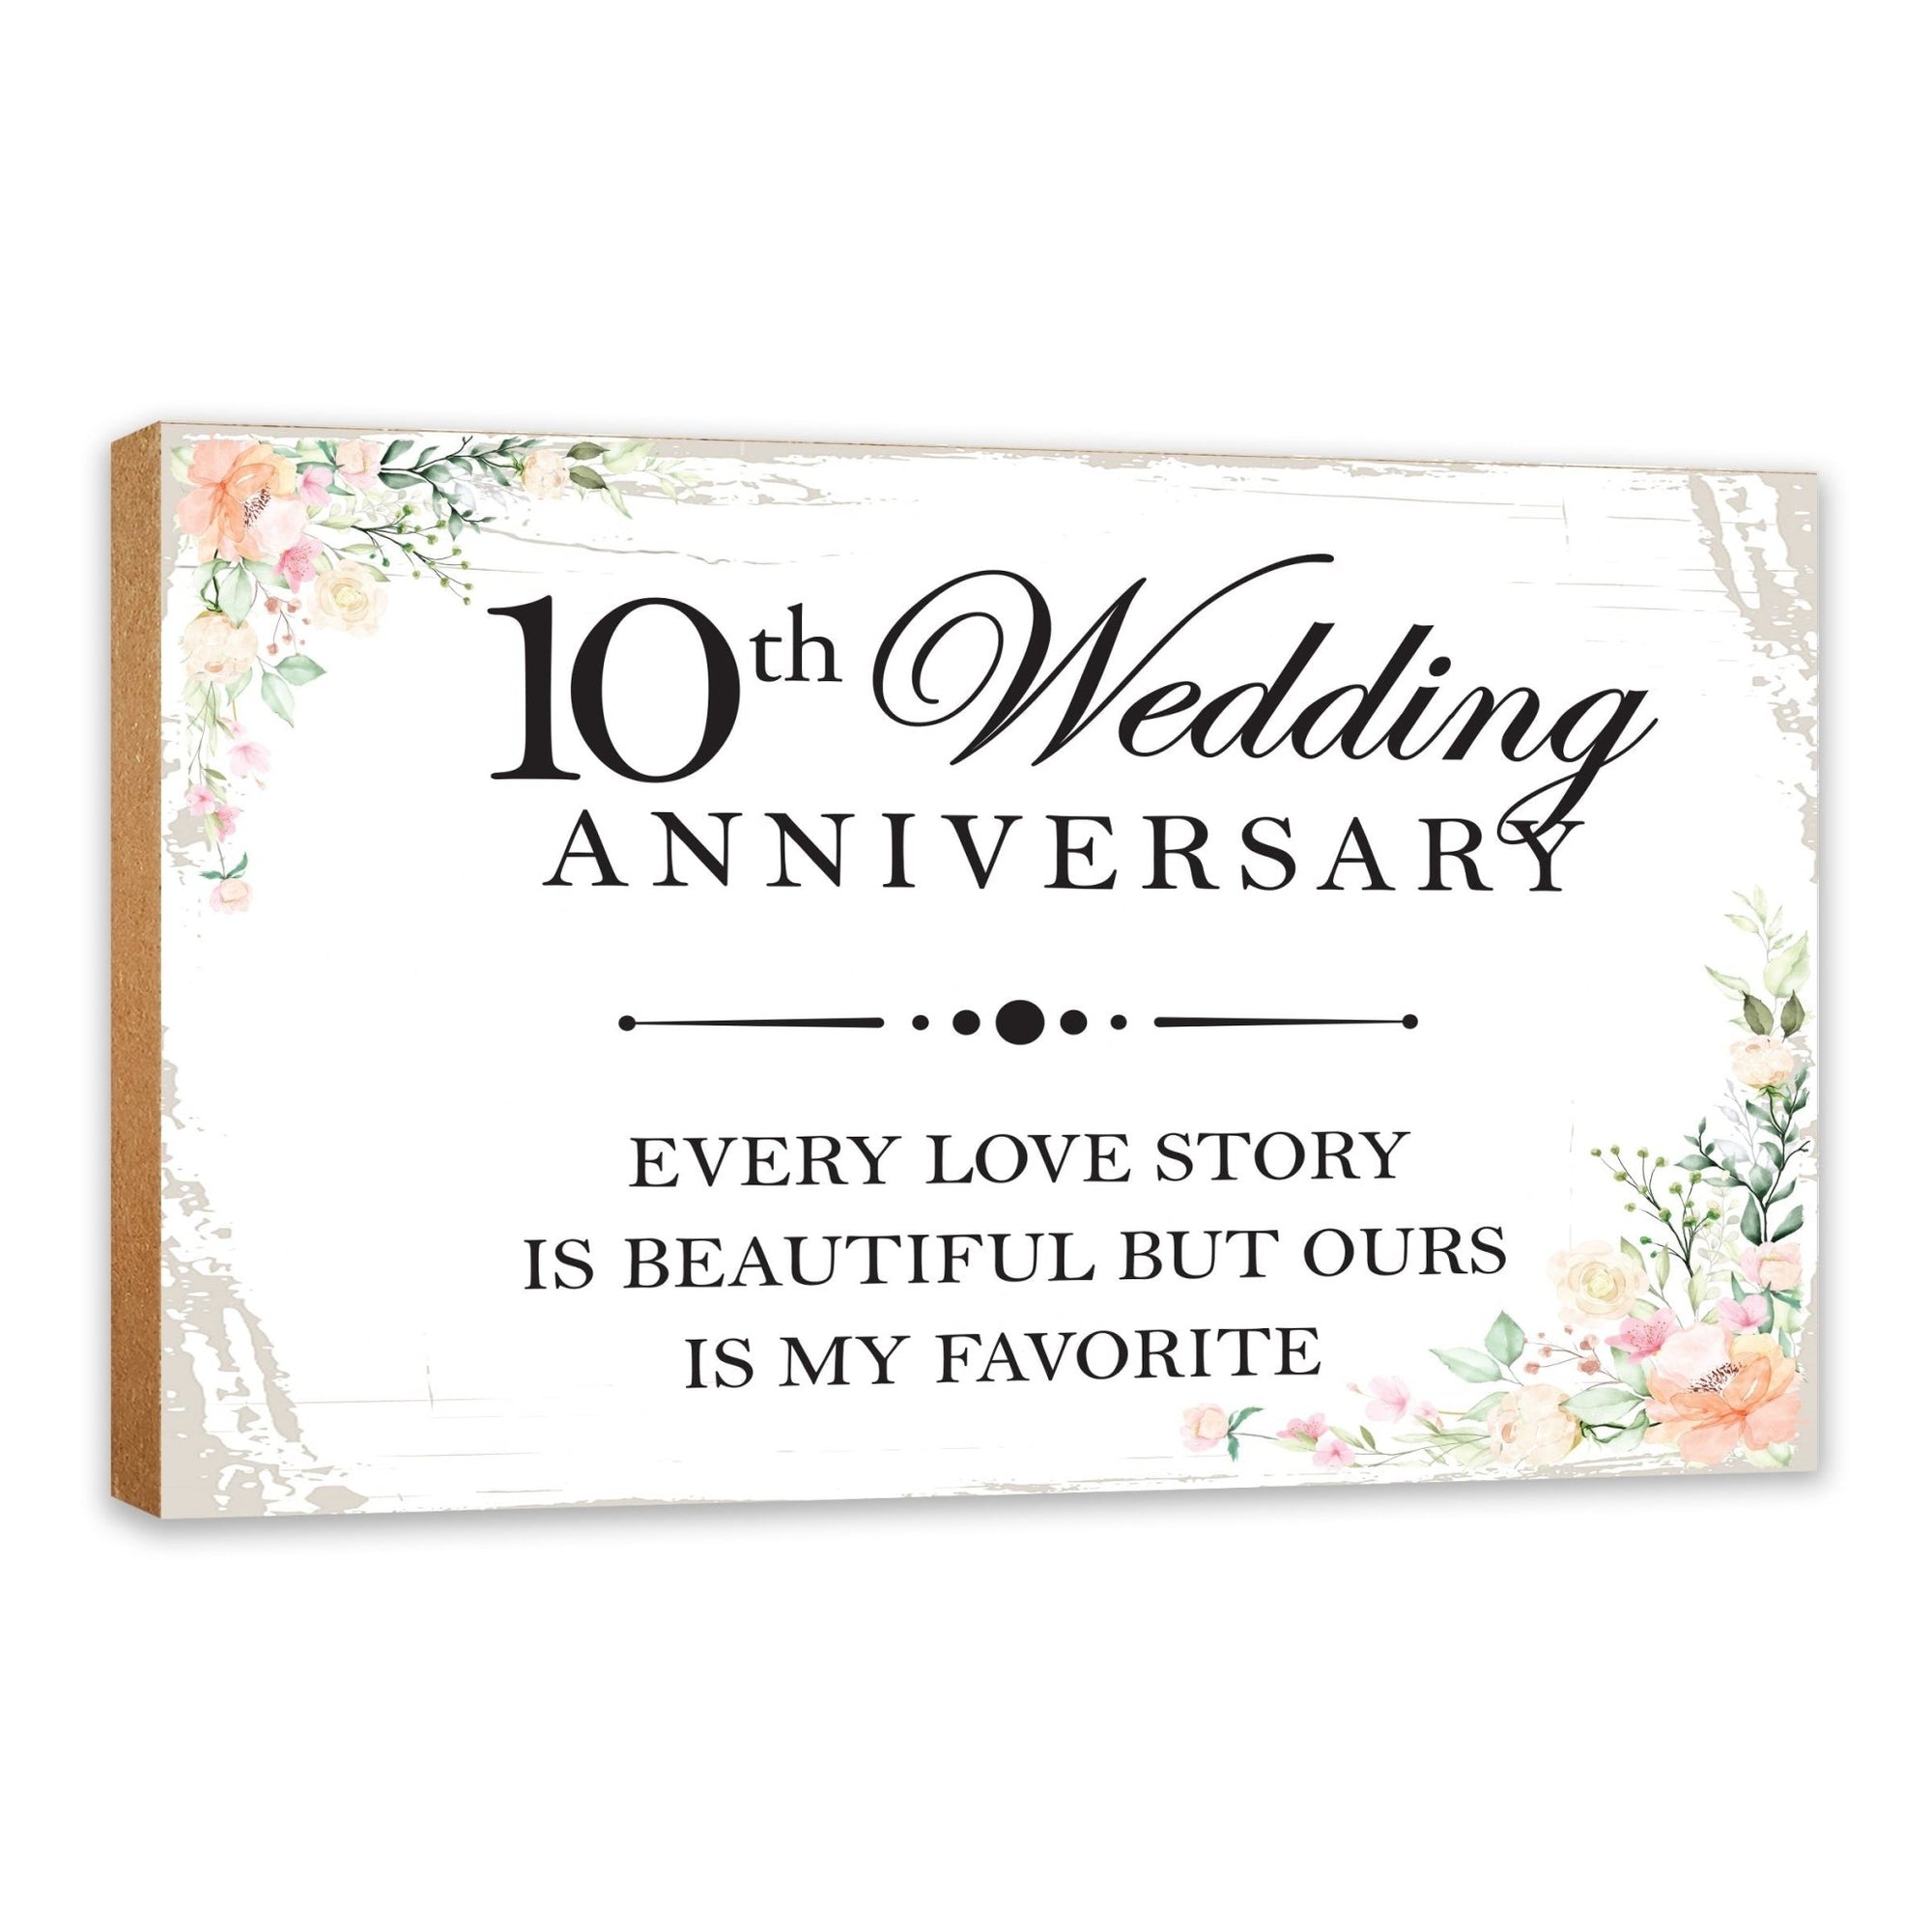 10th Wedding Anniversary Unique Shelf Decor and Tabletop Signs Gifts for Couples - Every Love Story - LifeSong Milestones